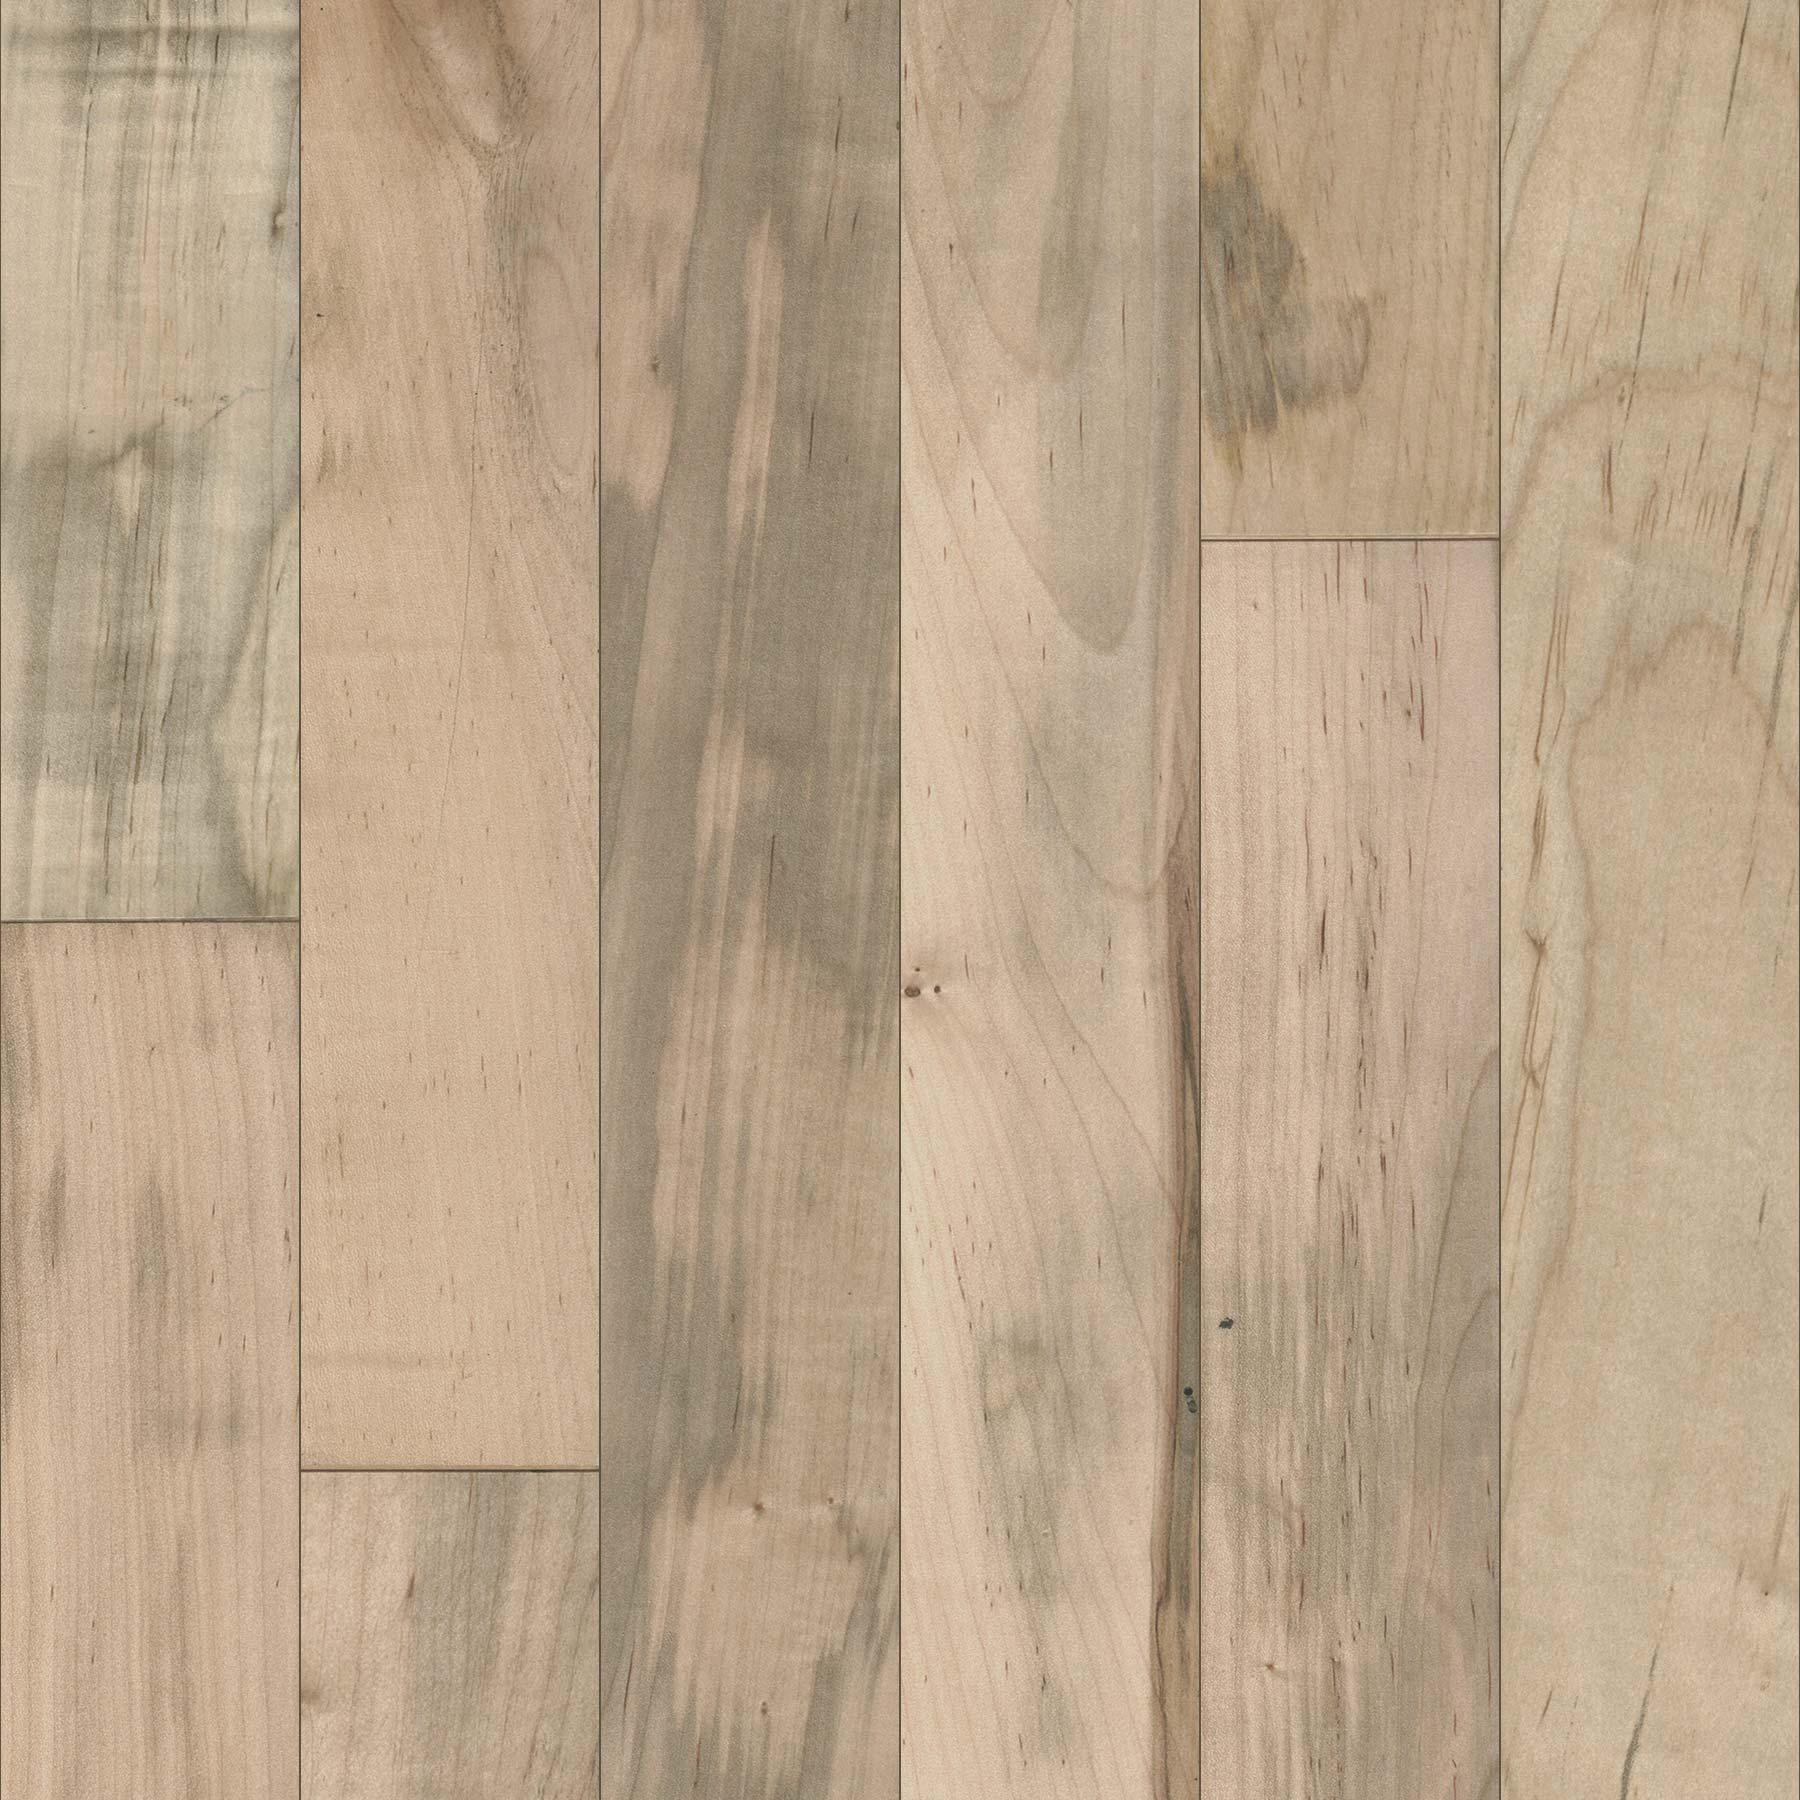 11 Trendy 2 1 4 Inch Maple Hardwood Flooring 2024 free download 2 1 4 inch maple hardwood flooring of kingsmill natural maple 3 wide 3 4 solid hardwood flooring with regard to natural maple m unat3 3 x 55 approved